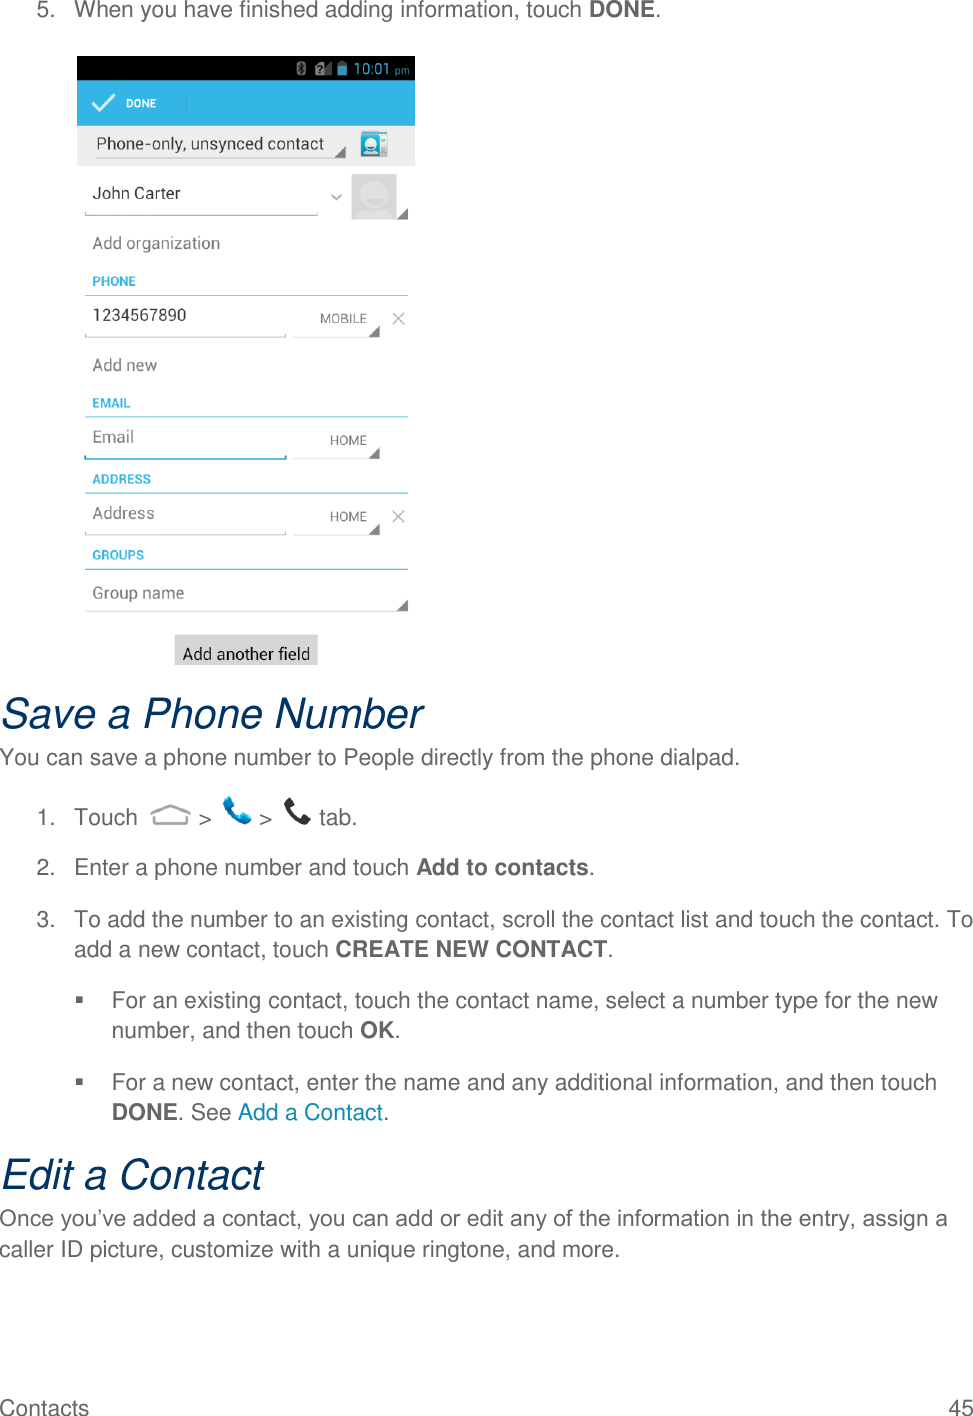 Contacts  45 5.  When you have finished adding information, touch DONE.   Save a Phone Number You can save a phone number to People directly from the phone dialpad. 1.  Touch   &gt;   &gt;   tab. 2.  Enter a phone number and touch Add to contacts. 3.  To add the number to an existing contact, scroll the contact list and touch the contact. To add a new contact, touch CREATE NEW CONTACT.   For an existing contact, touch the contact name, select a number type for the new number, and then touch OK.   For a new contact, enter the name and any additional information, and then touch DONE. See Add a Contact. Edit a Contact Once you’ve added a contact, you can add or edit any of the information in the entry, assign a caller ID picture, customize with a unique ringtone, and more. 